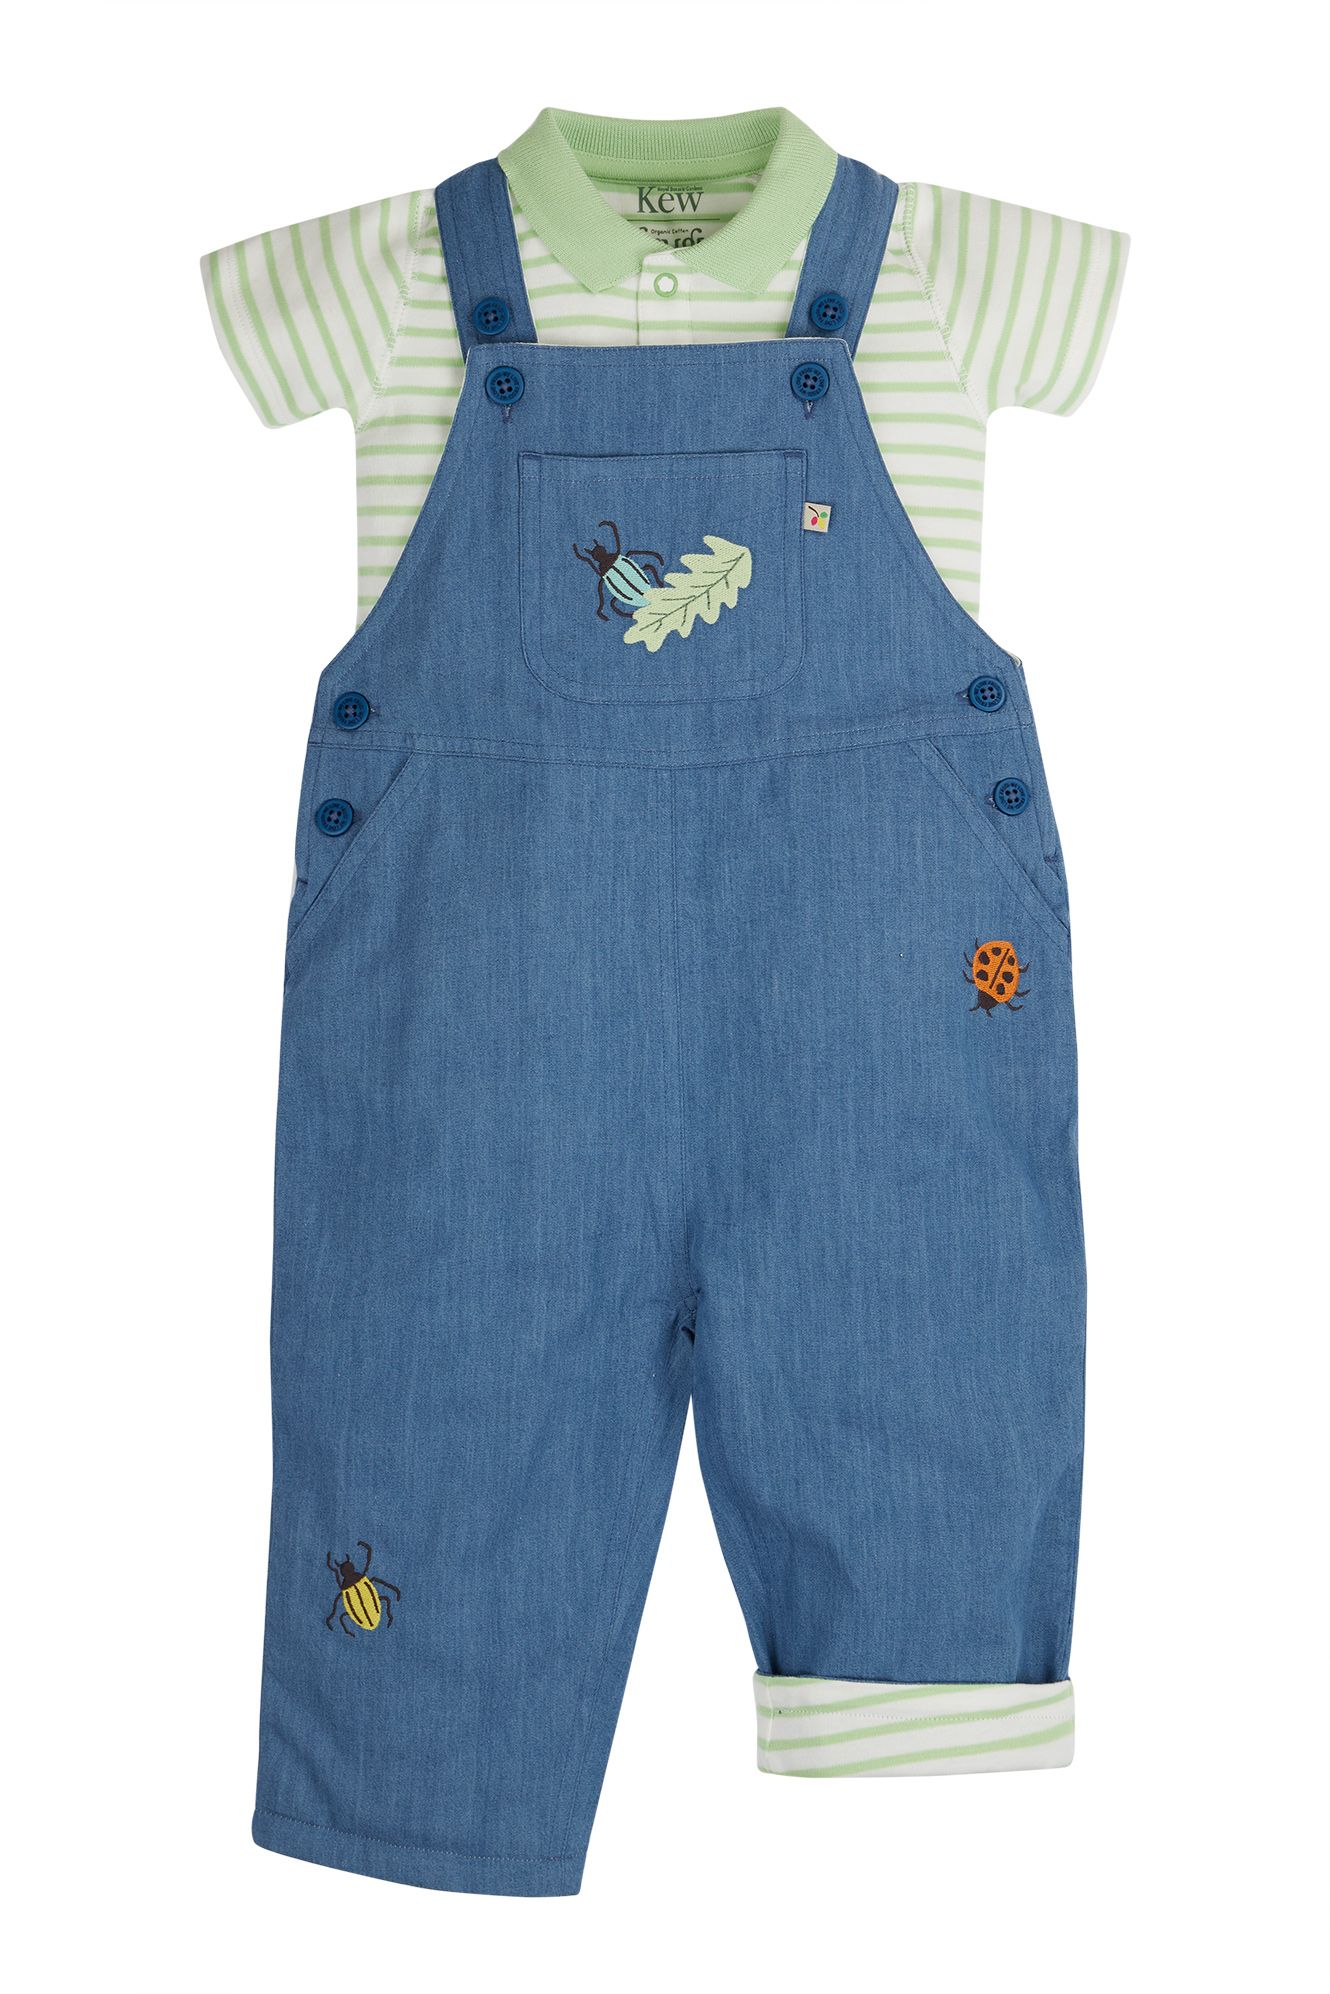 Kew Gardens Bailey Dungaree Outfit